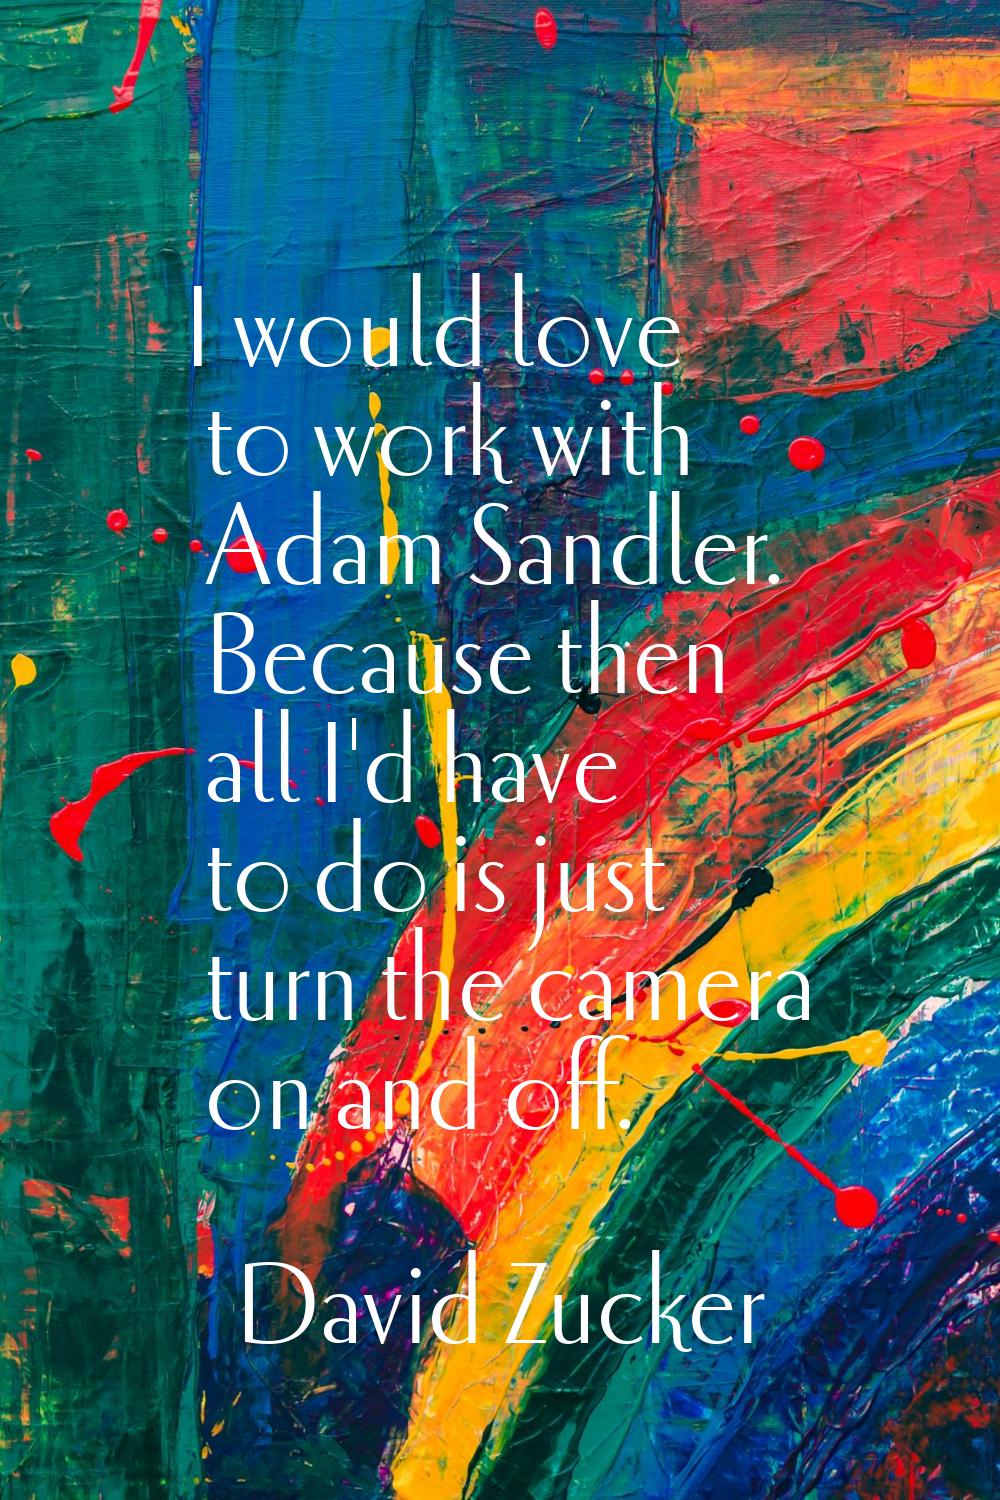 I would love to work with Adam Sandler. Because then all I'd have to do is just turn the camera on 